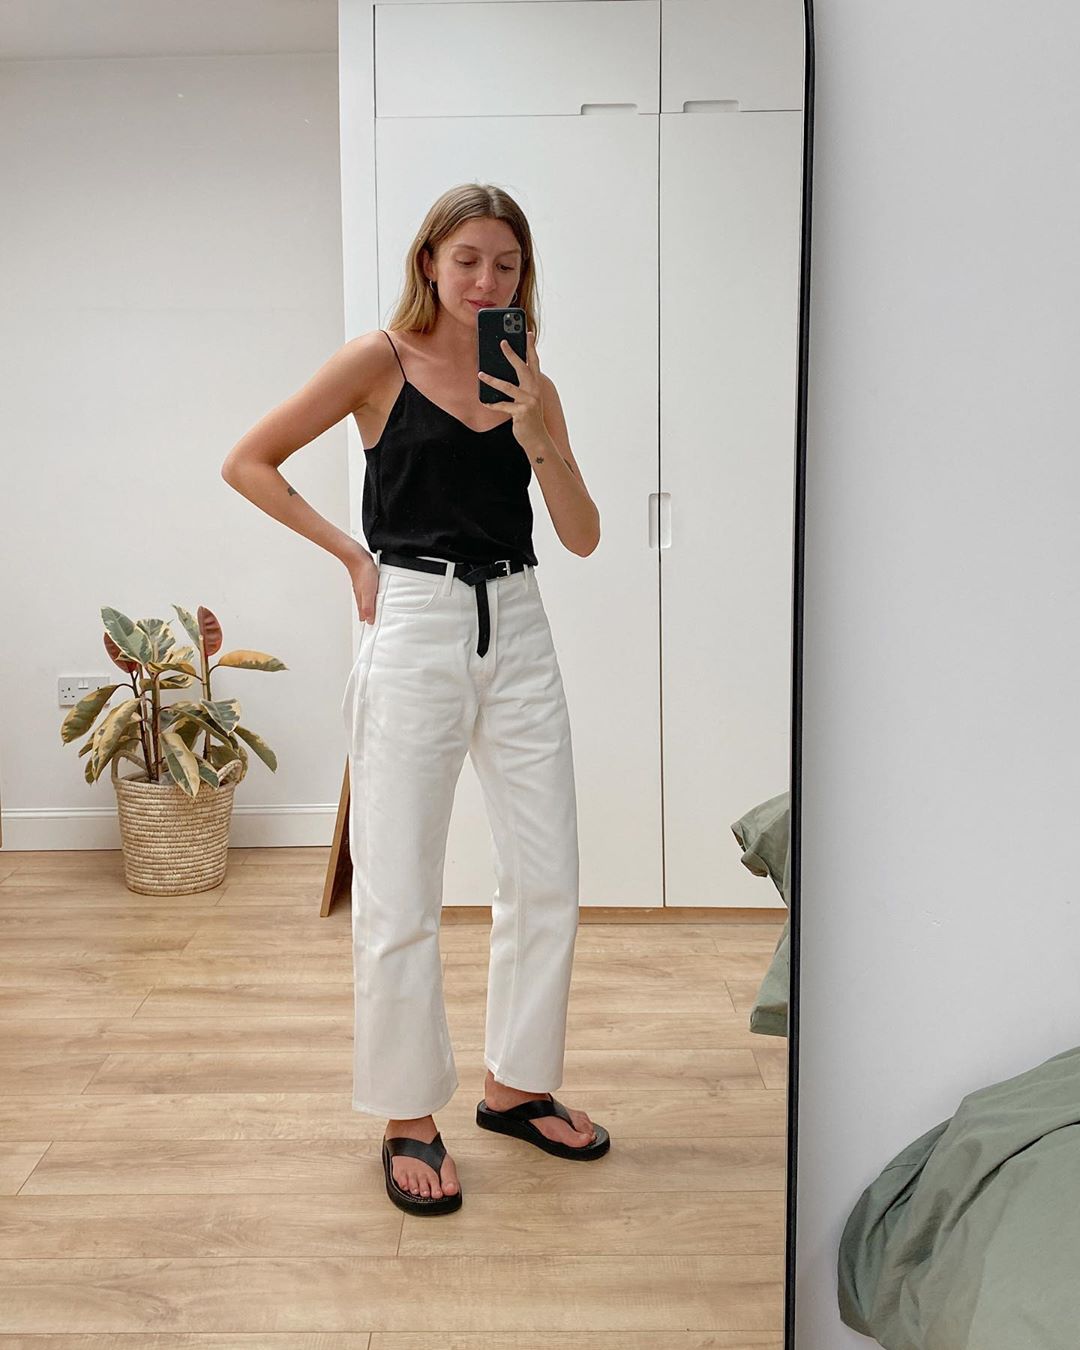 Casual-Chic Outfit Idea — Brittany Bathgate in a black cami, white jeans, and black flip-flops